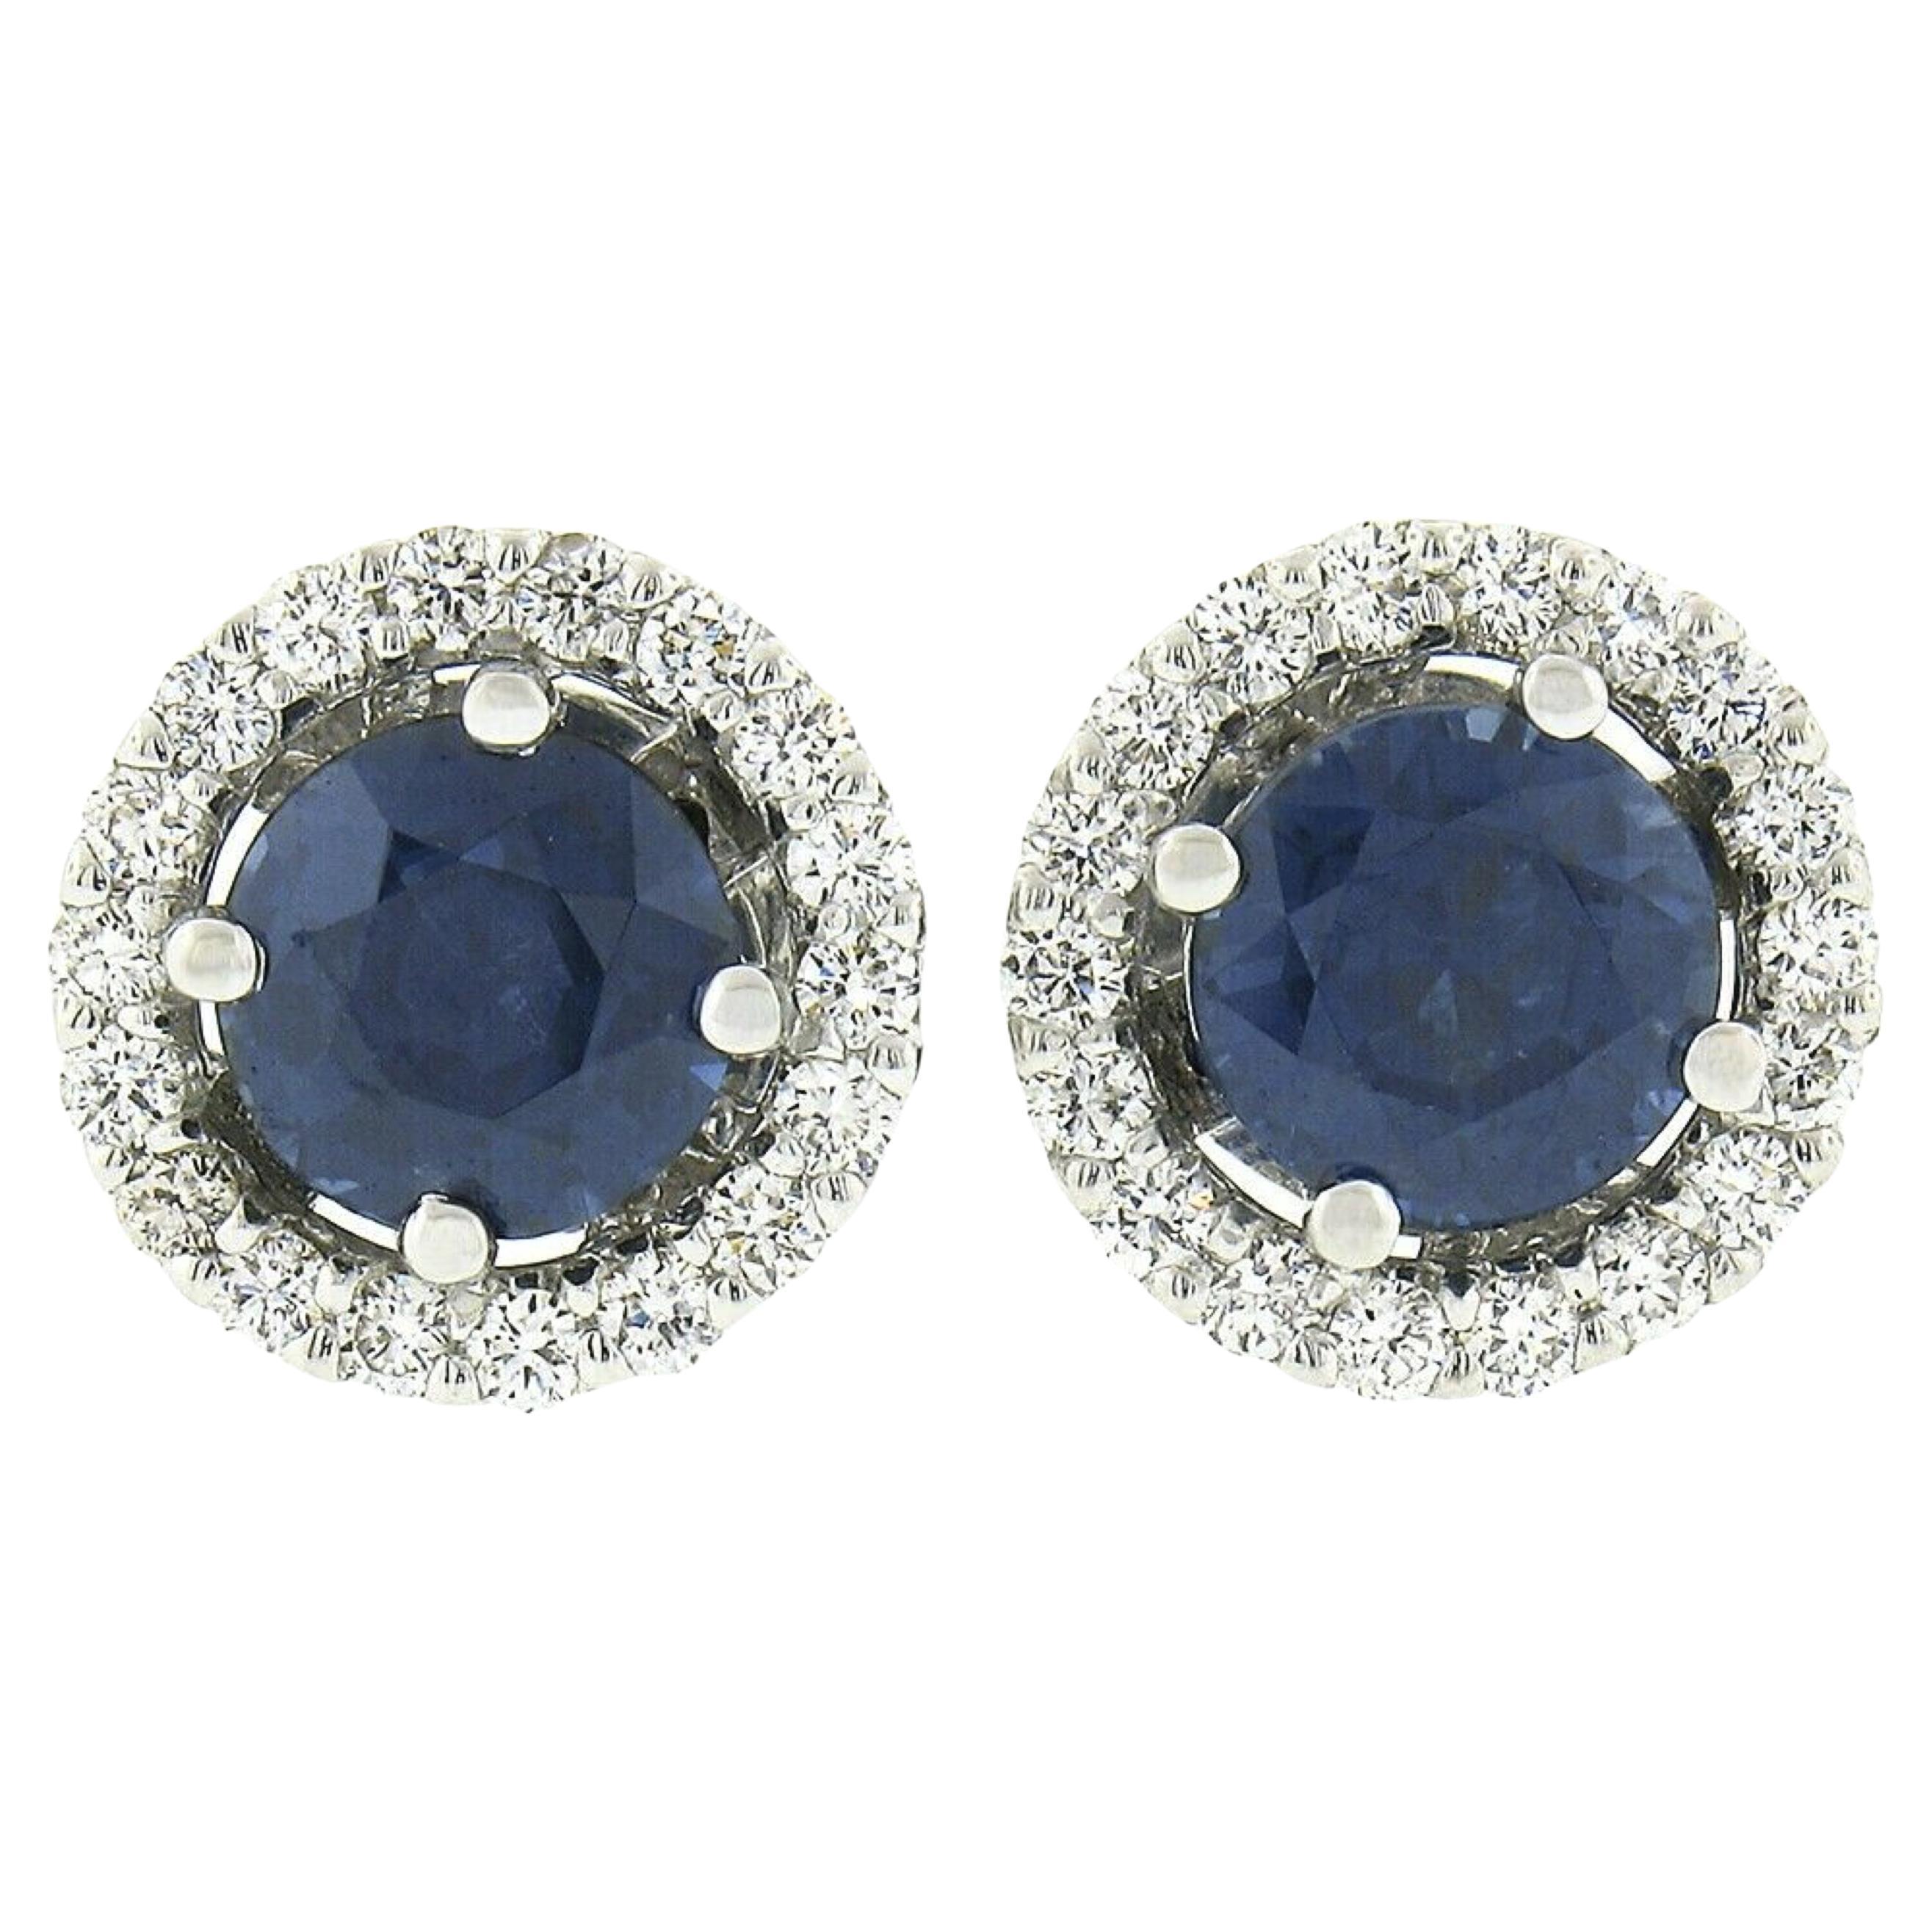 New 18k White Gold 1.86ct Round Royal Blue Sapphire & Diamond Halo Stud Earrings For Sale